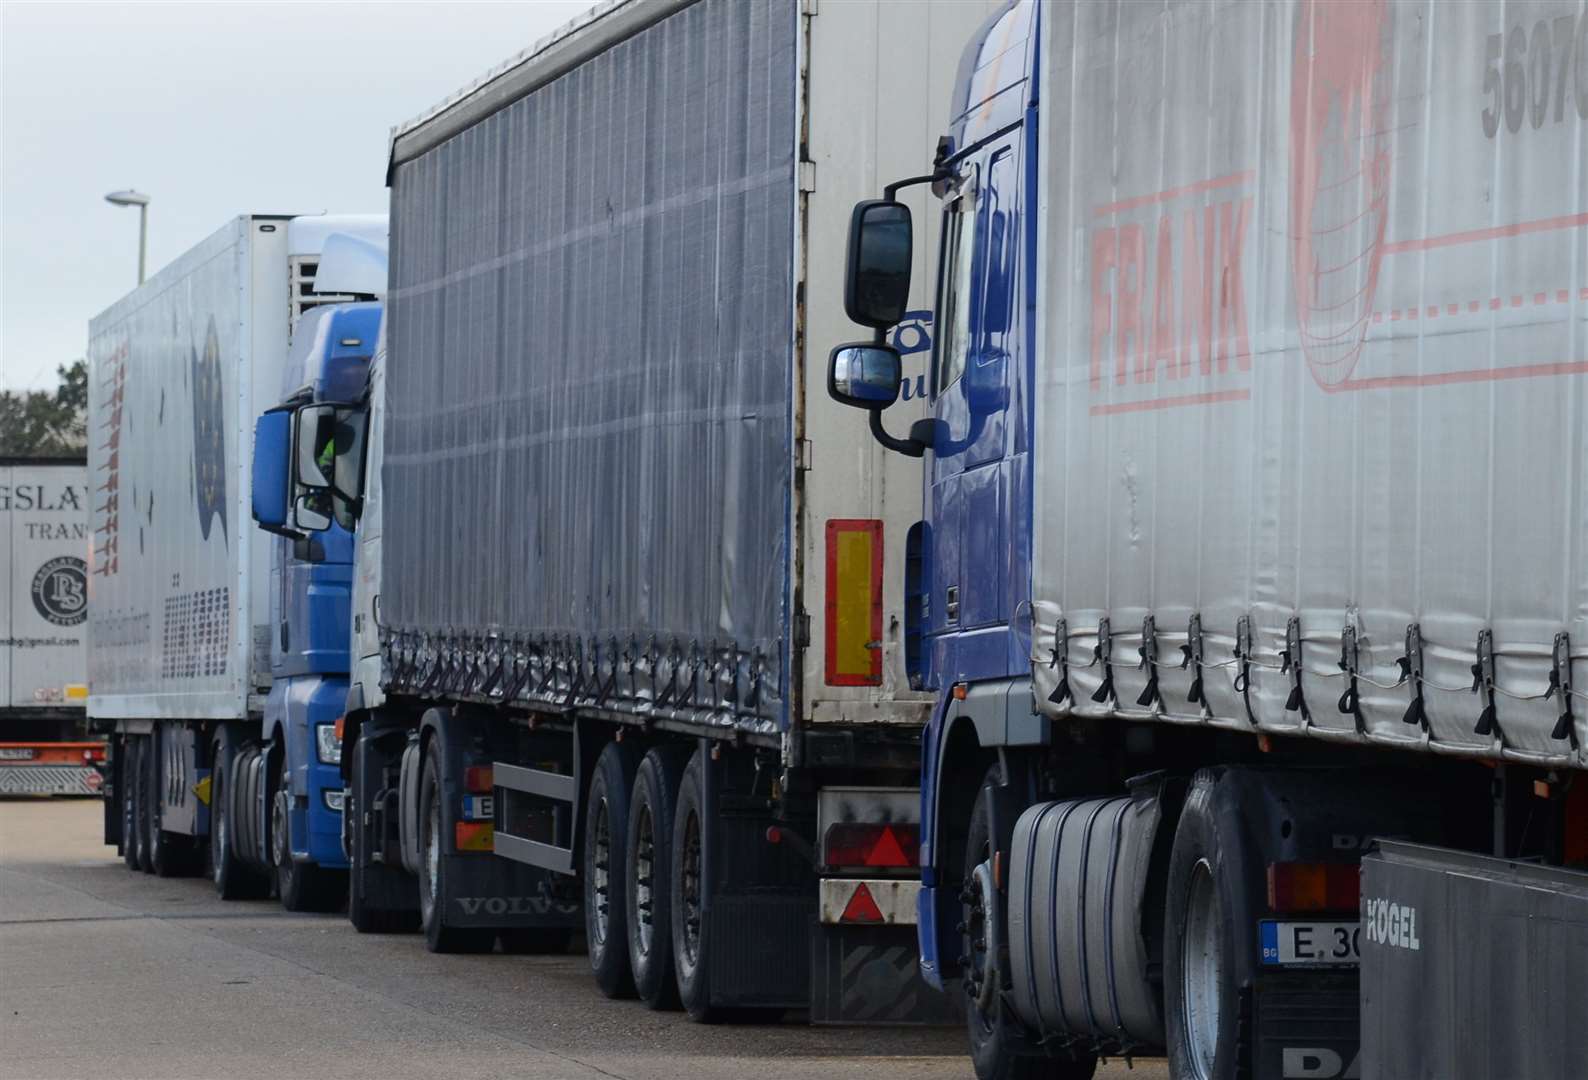 The Sevington site will hold up to 2,000 lorries